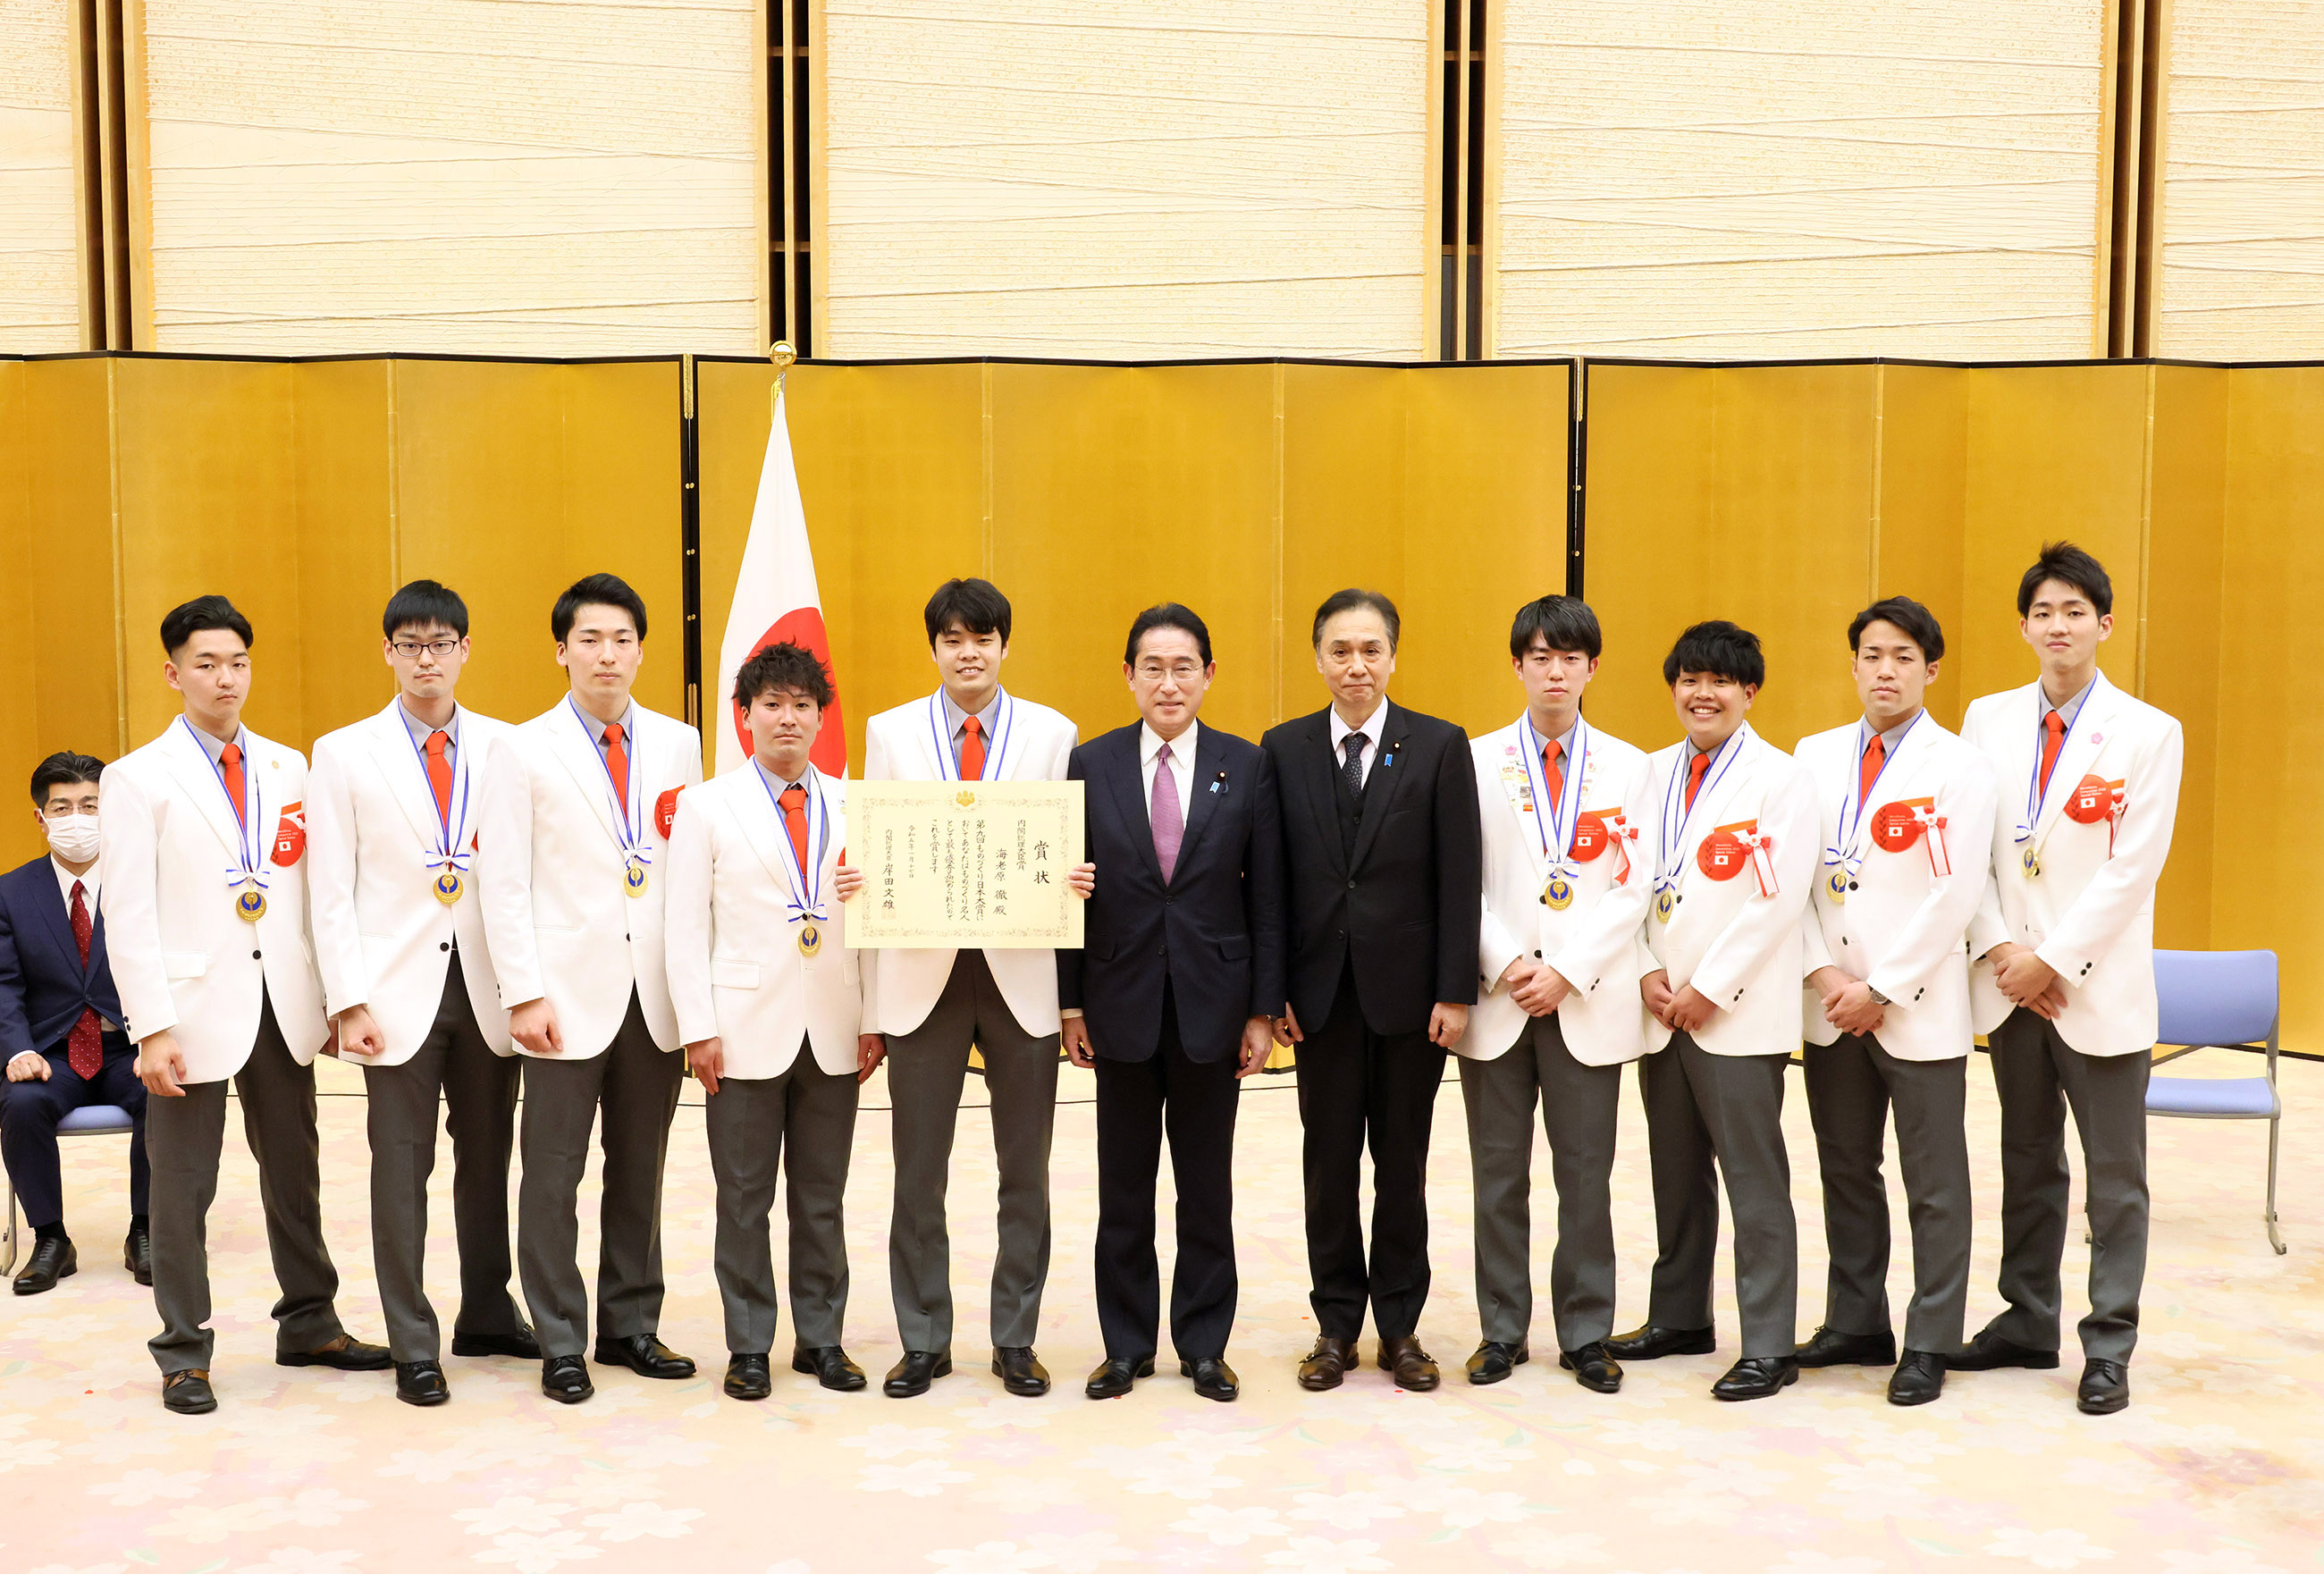 Commemorative photo session with award winners (7)